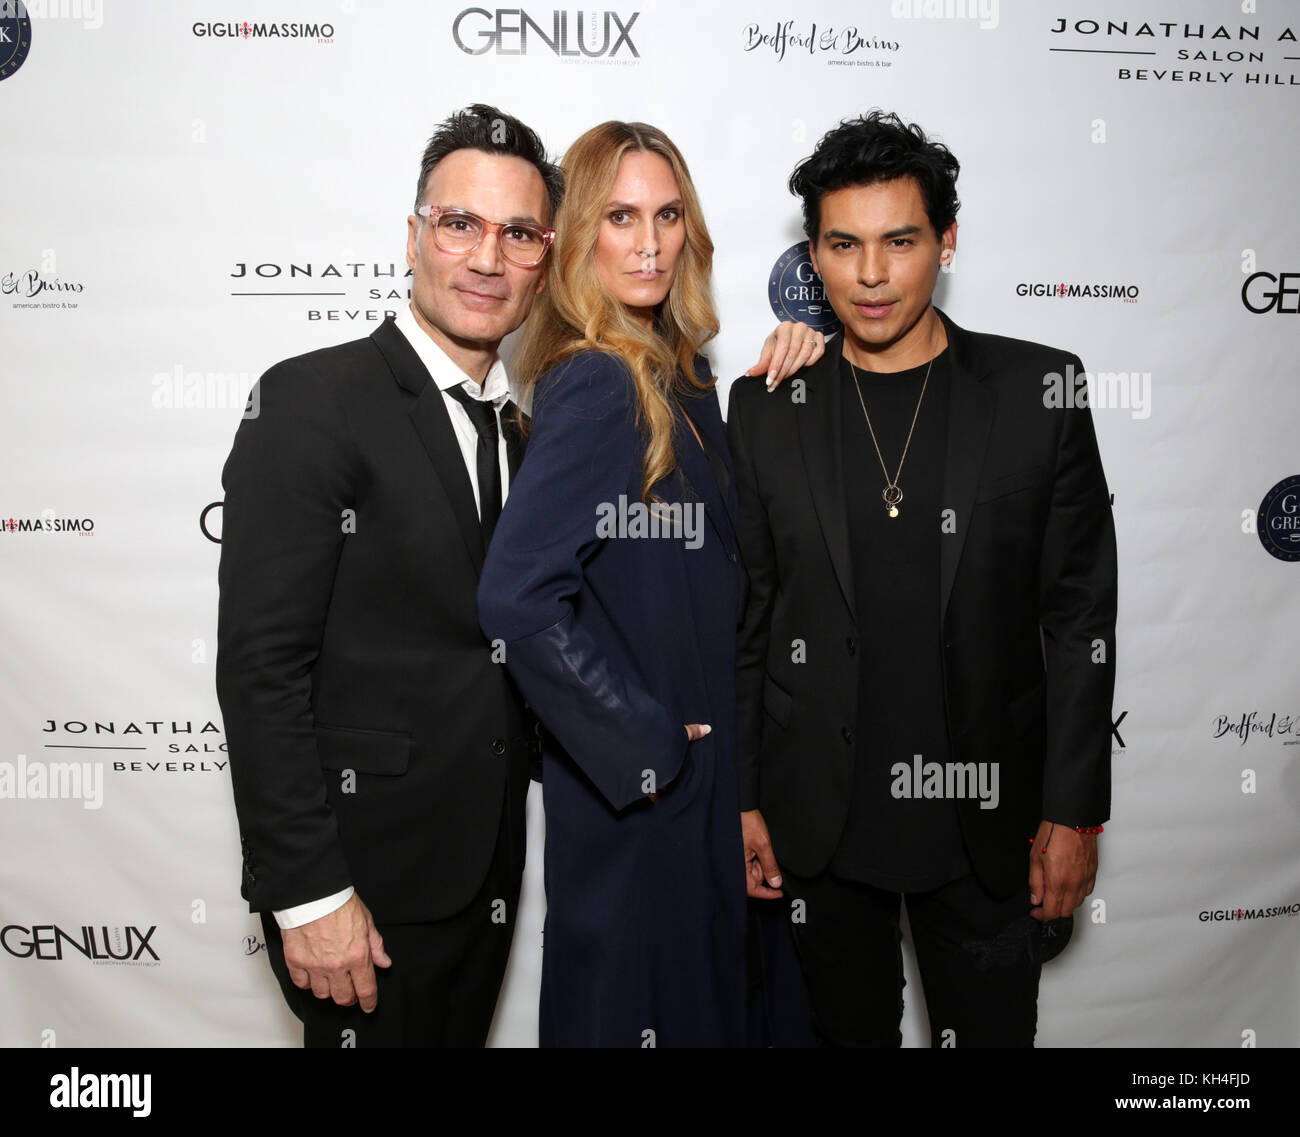 Celebrities attend Jonathan Antin Salon Opening hosted by Genlux at Jonathan Antin in Beverly Hills  Featuring: Jonathan Antin, Rochelle Goodrick, Michael Solis Where: Los Angeles, California, United States When: 12 Oct 2017 Credit: Brian To/WENN.com Stock Photo